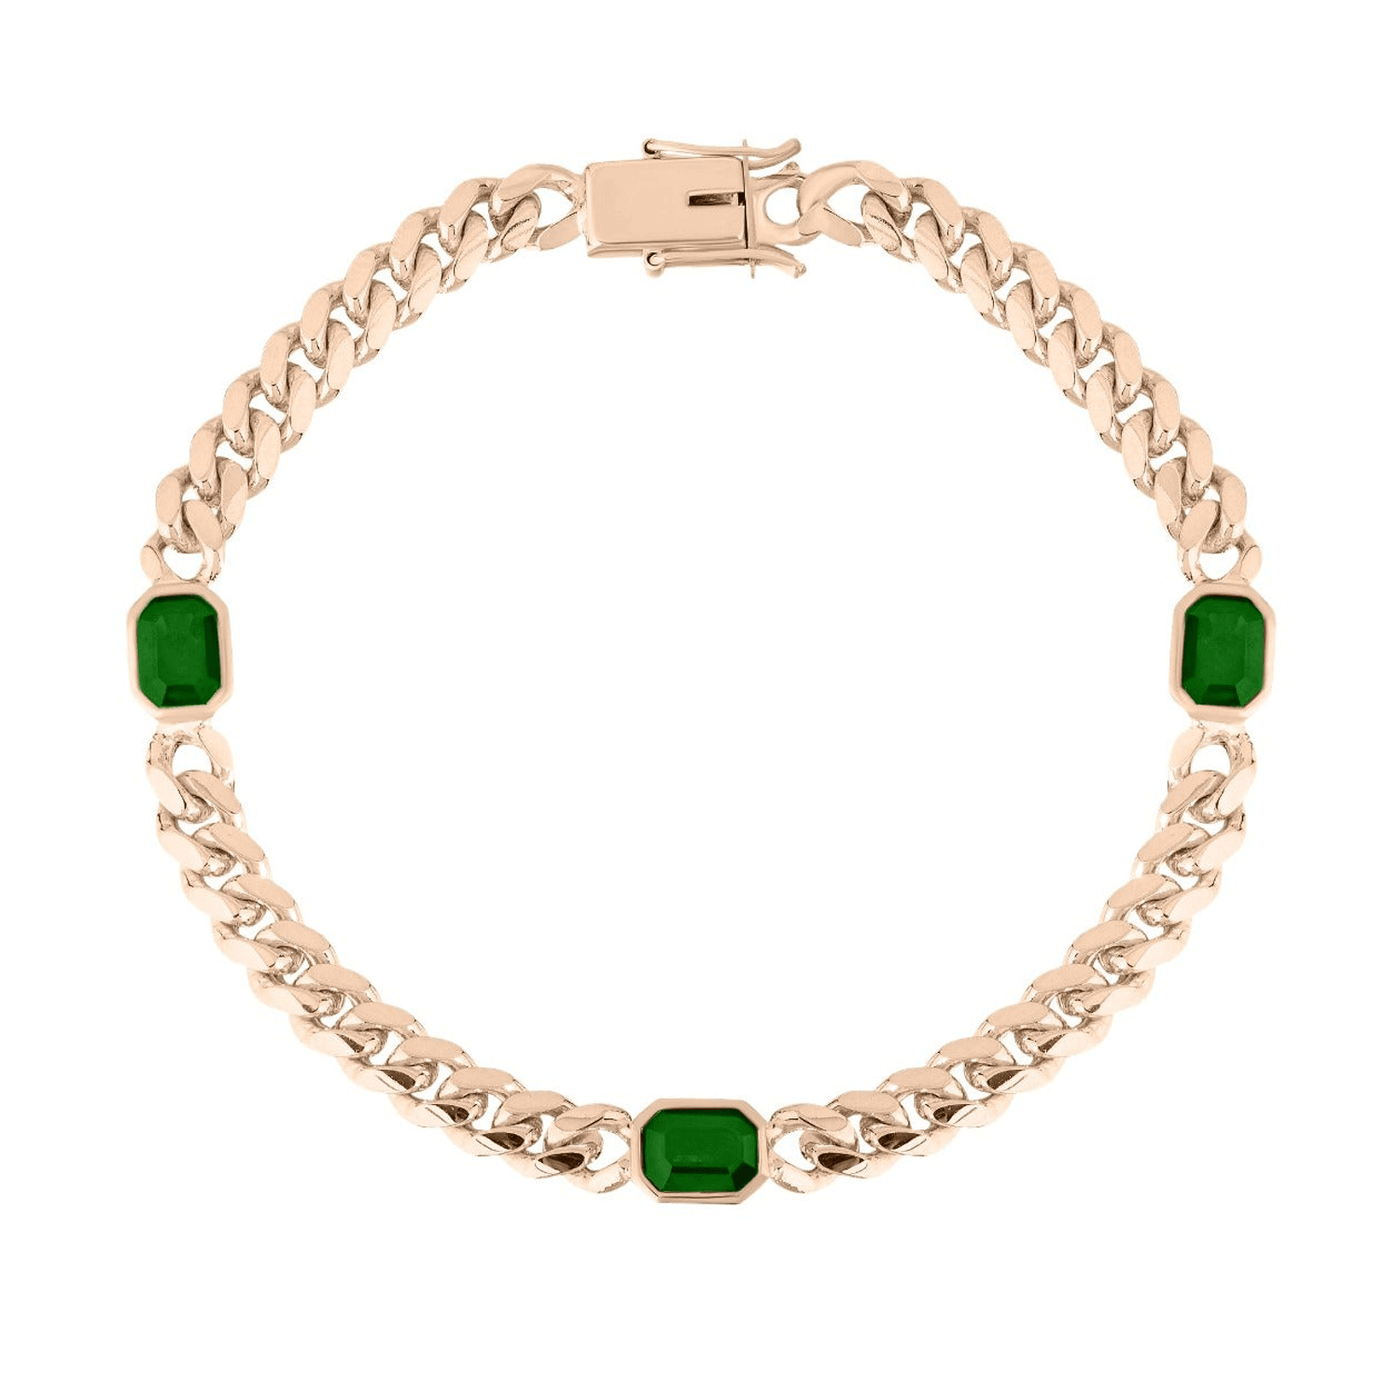 Cuban Chain Bracelet With Colored Stones